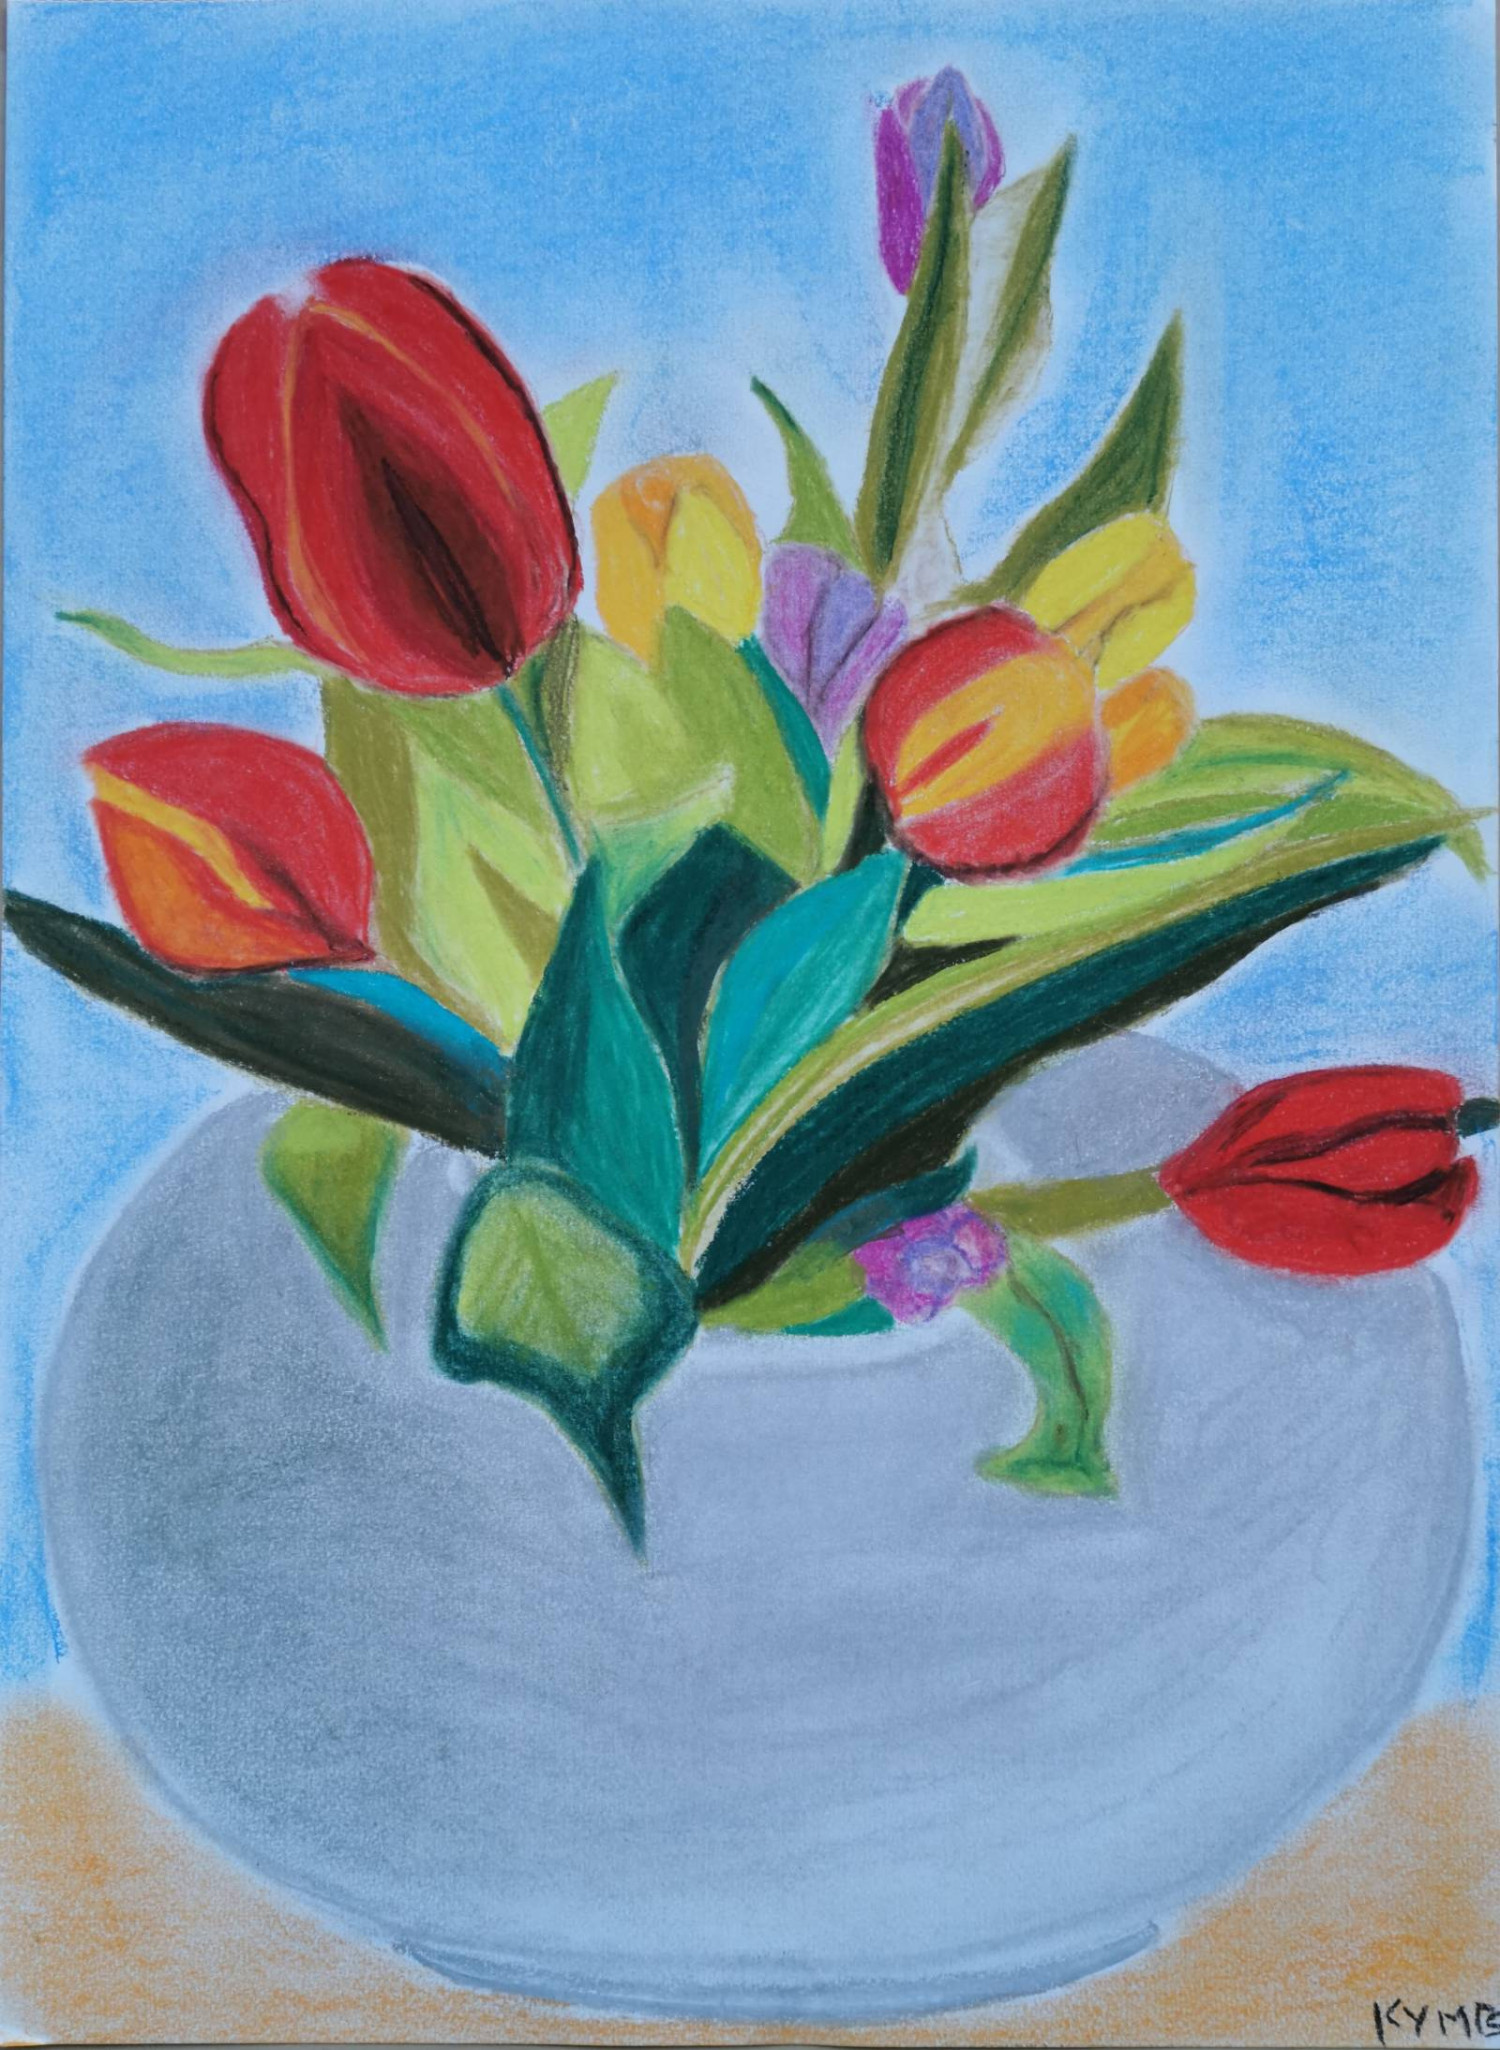 *Colors of February tulips*, pastel on paper, 29.7 x 42cm